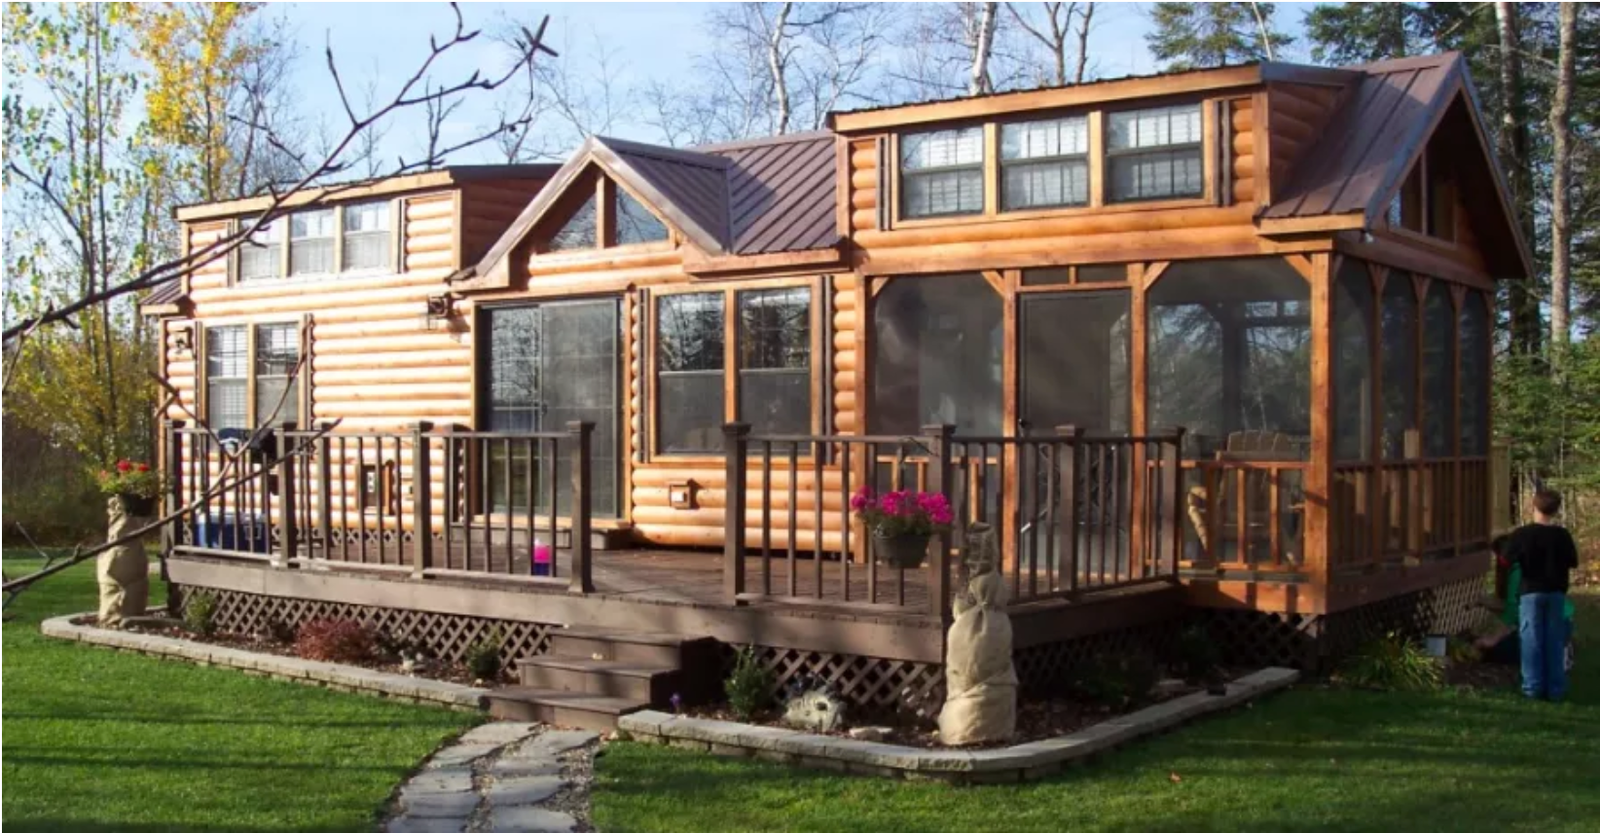 These Park Model Log Cabins Give You The Best Of Both Worlds